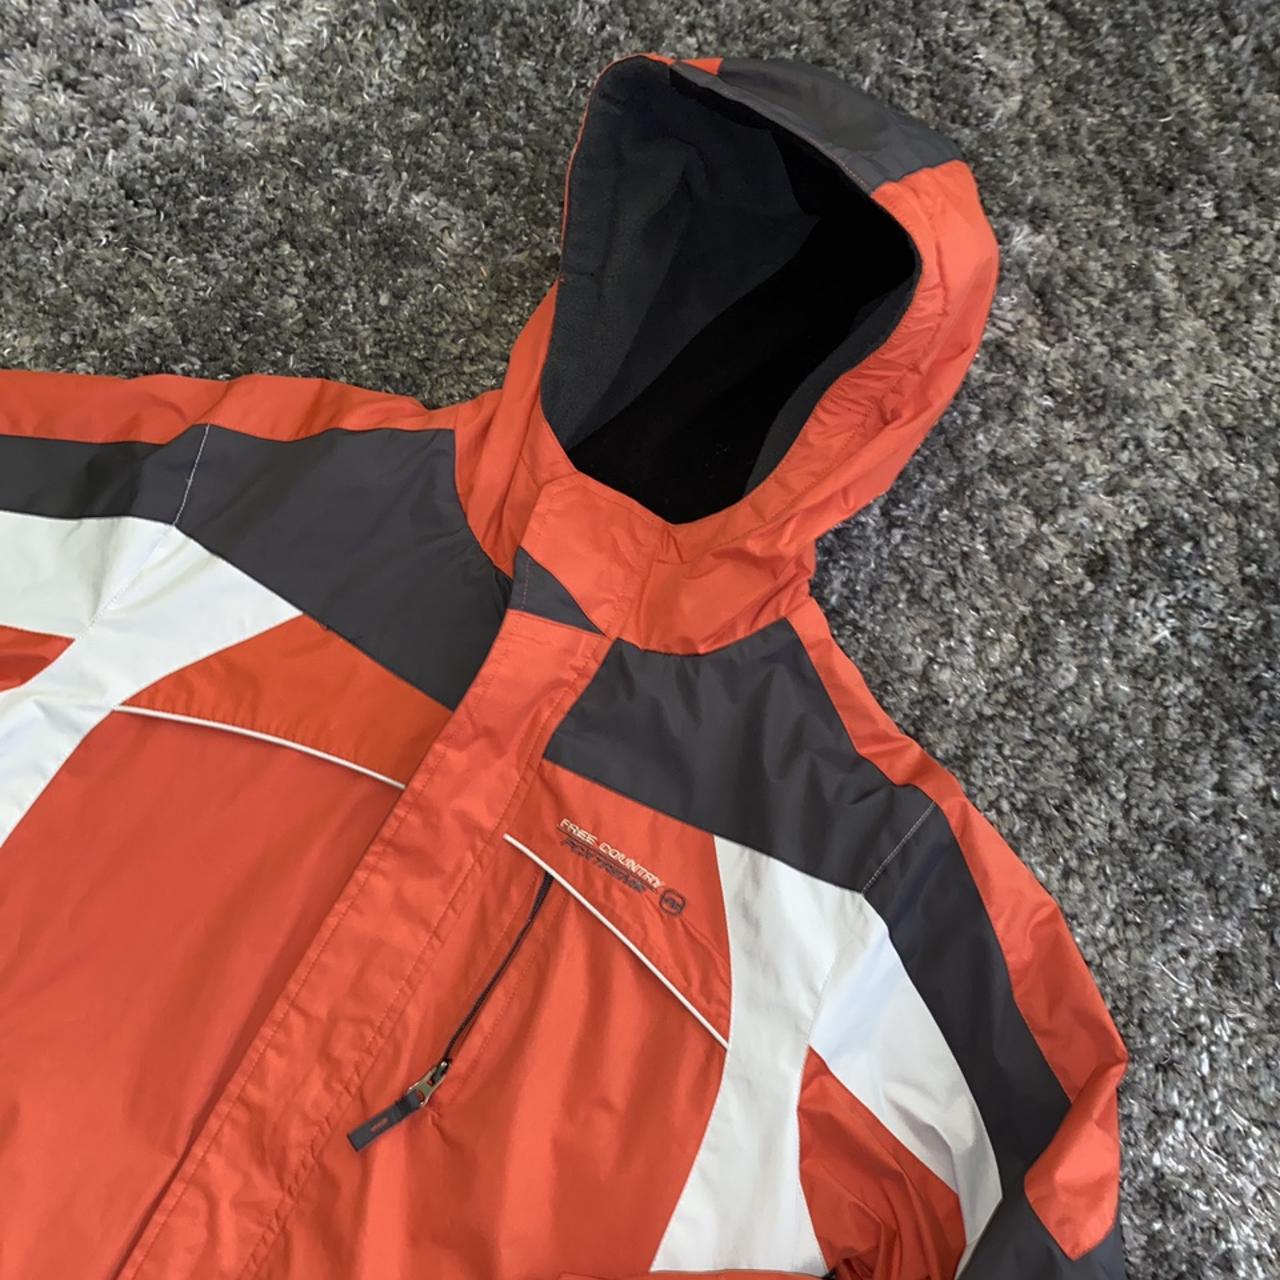 Product Image 3 - Reversible Free Country Jacket !
This